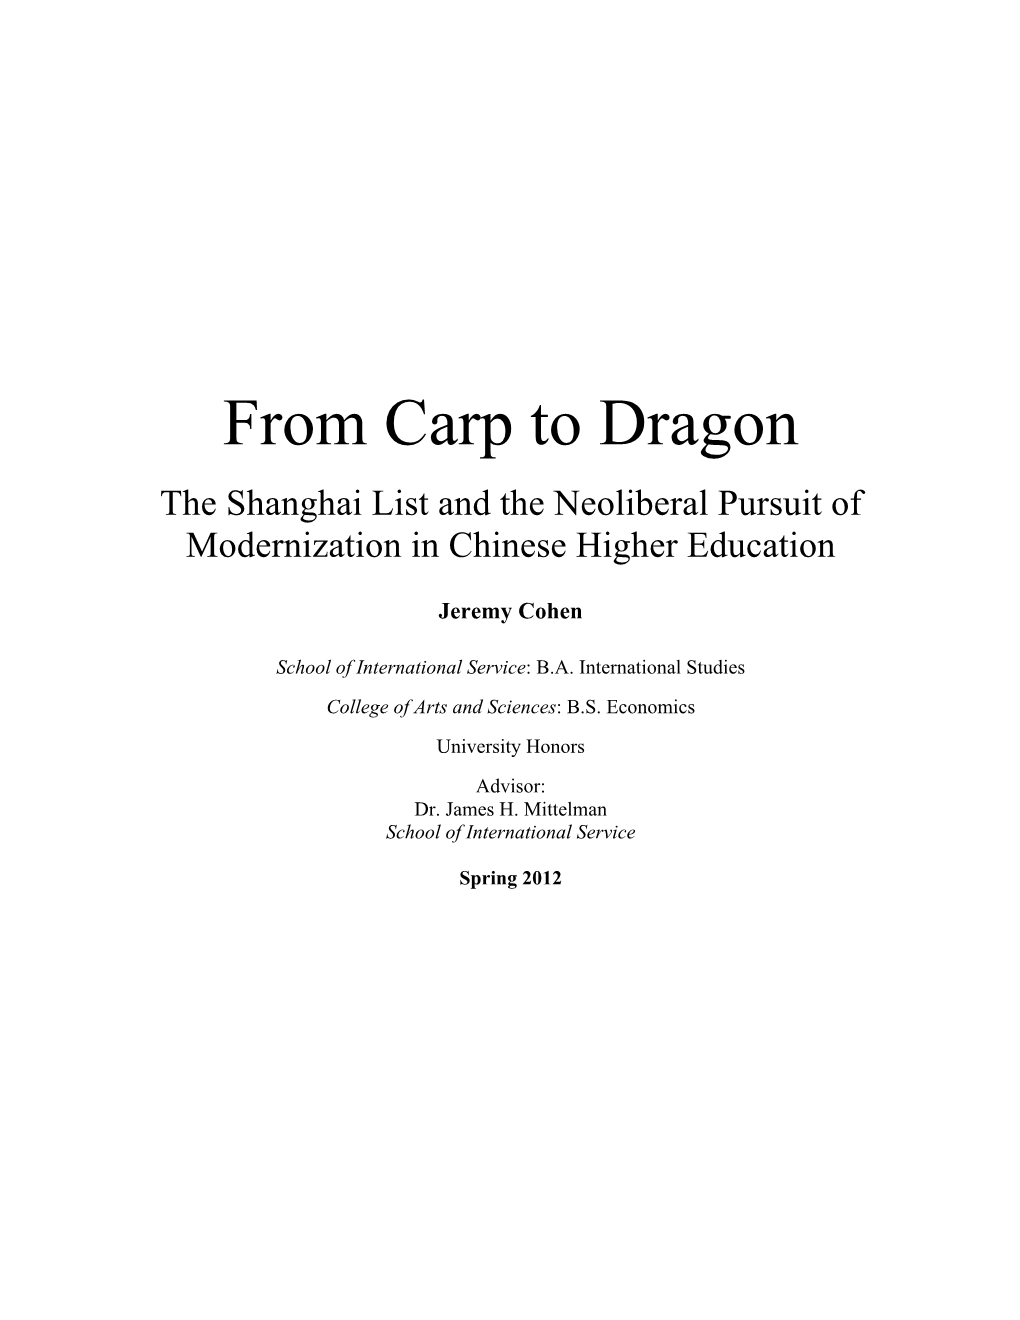 From Carp to Dragon the Shanghai List and the Neoliberal Pursuit of Modernization in Chinese Higher Education